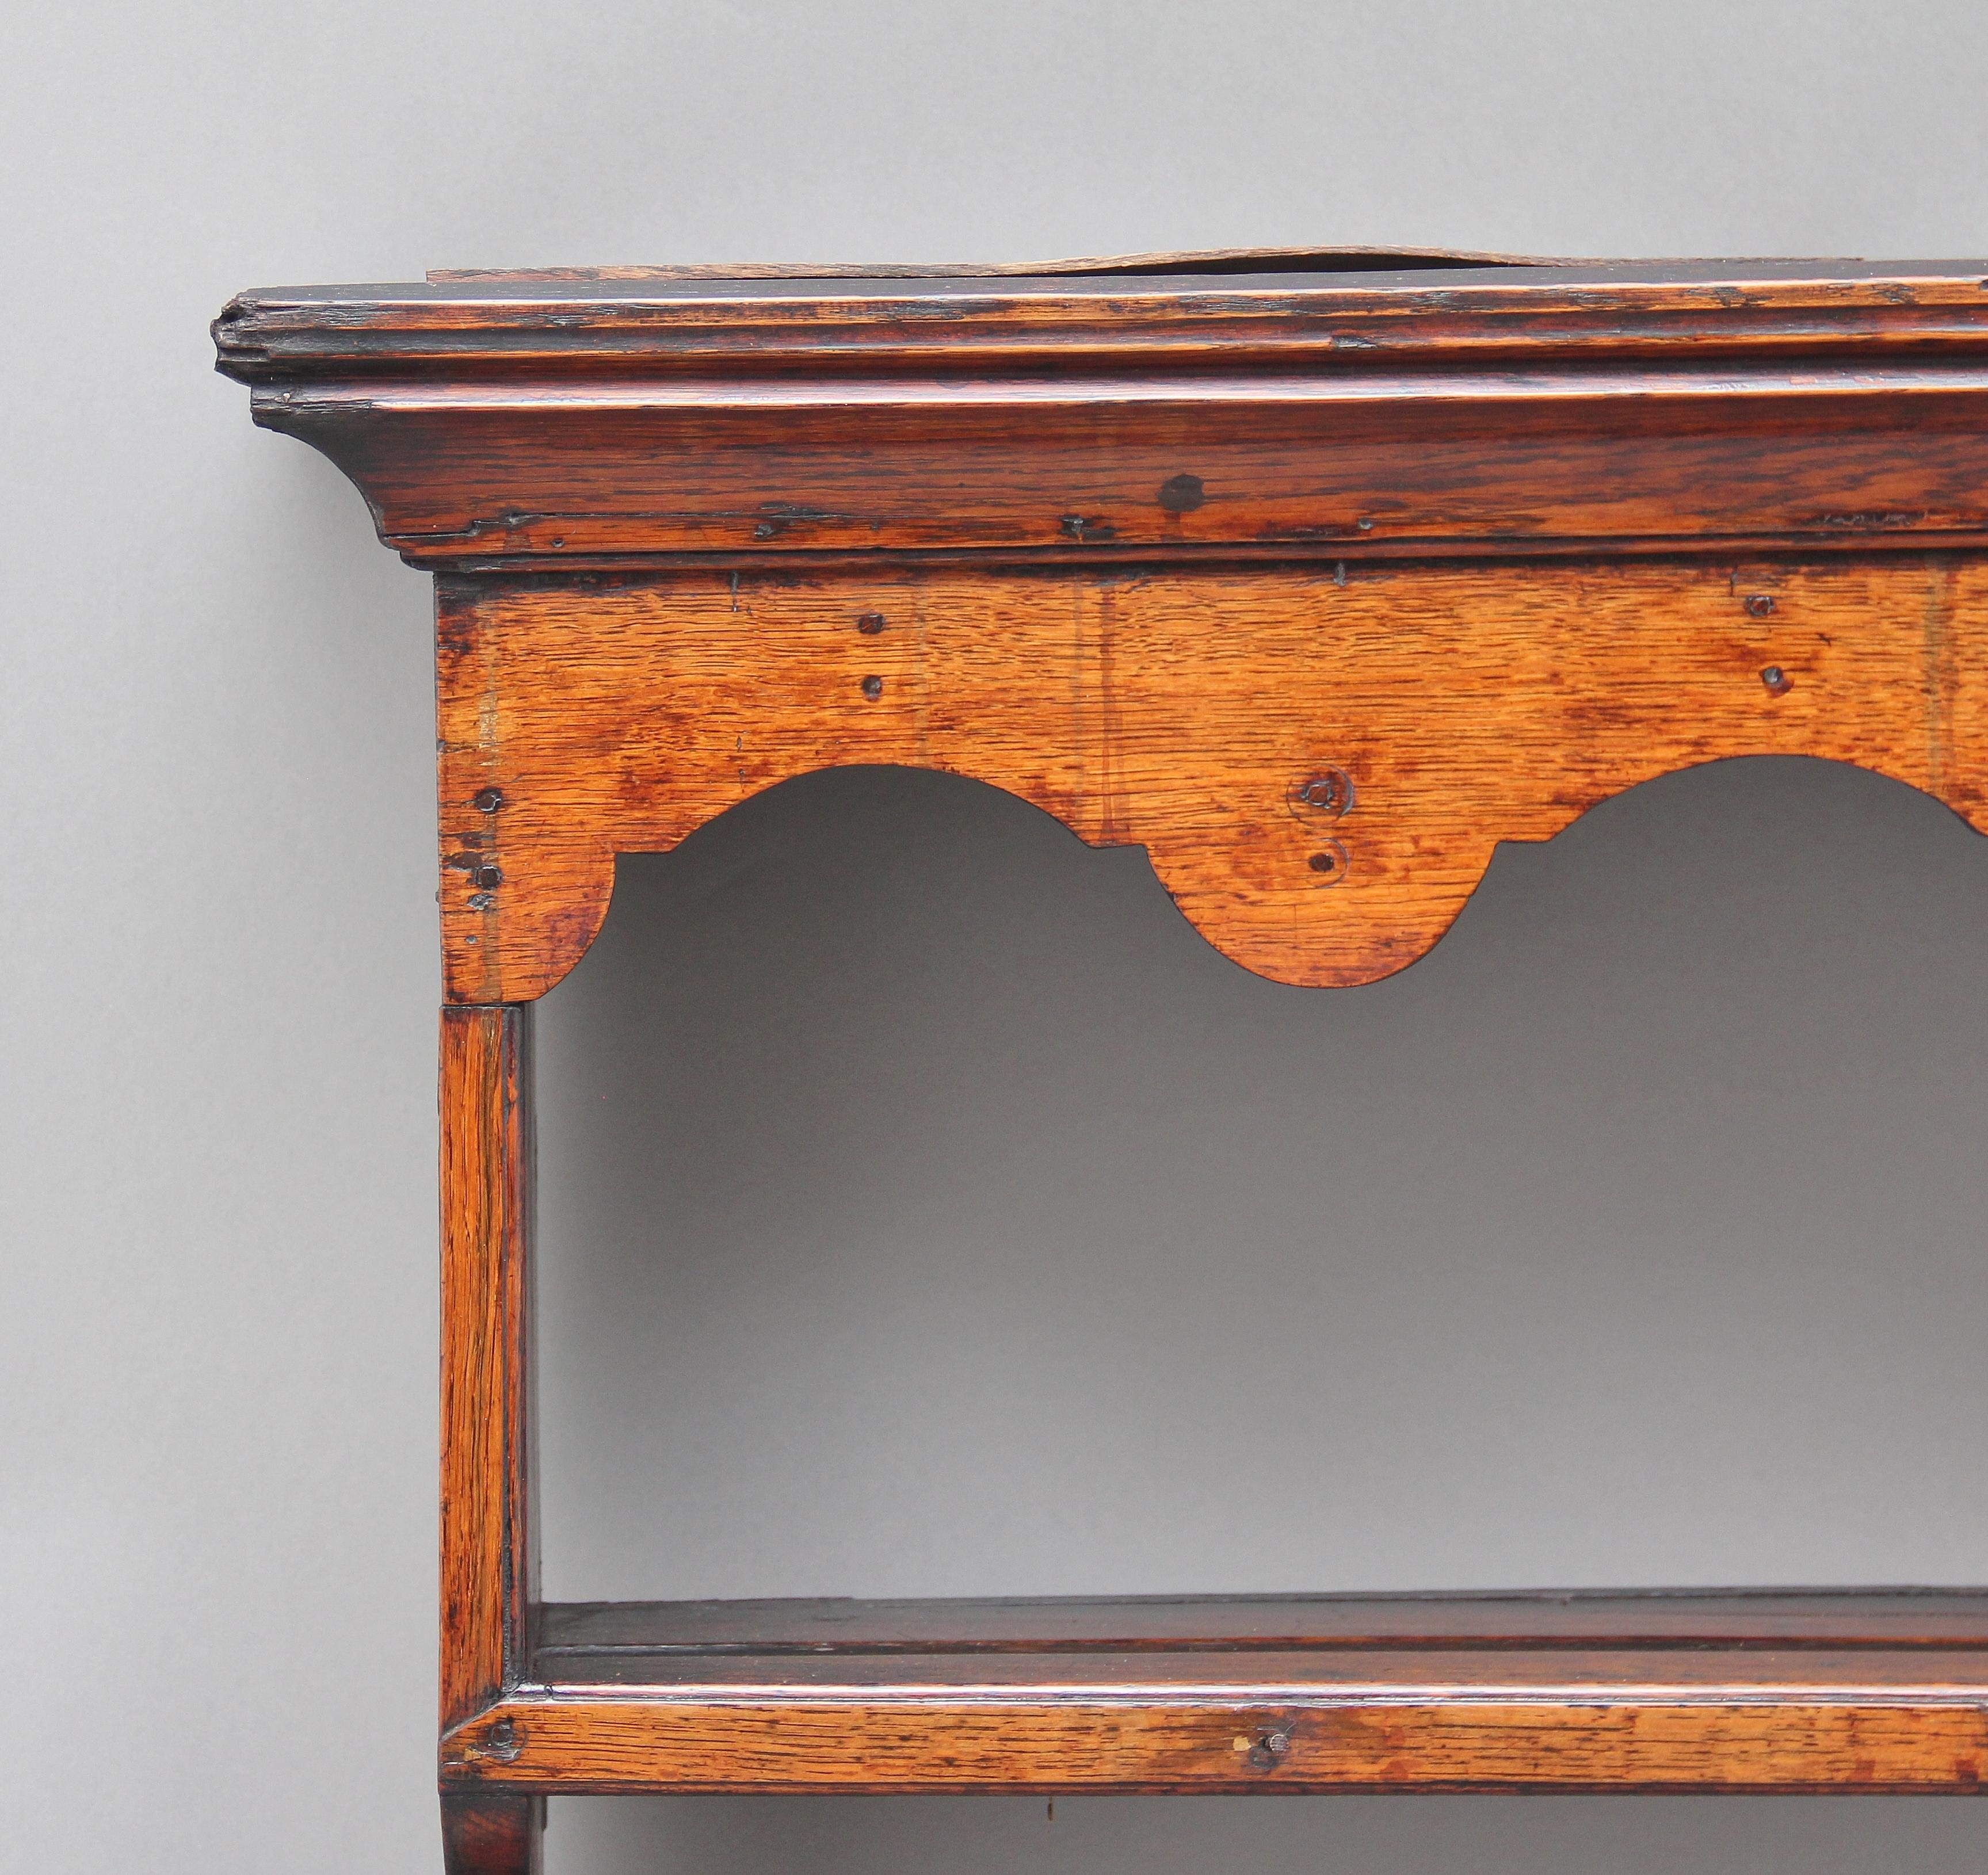 18th century oak hanging rack, the moulded cornice above a scallop-edged frieze rail, two open shelves with plate grooves and brass cup hooks, shaped end supports. Lovely color, circa 1780.